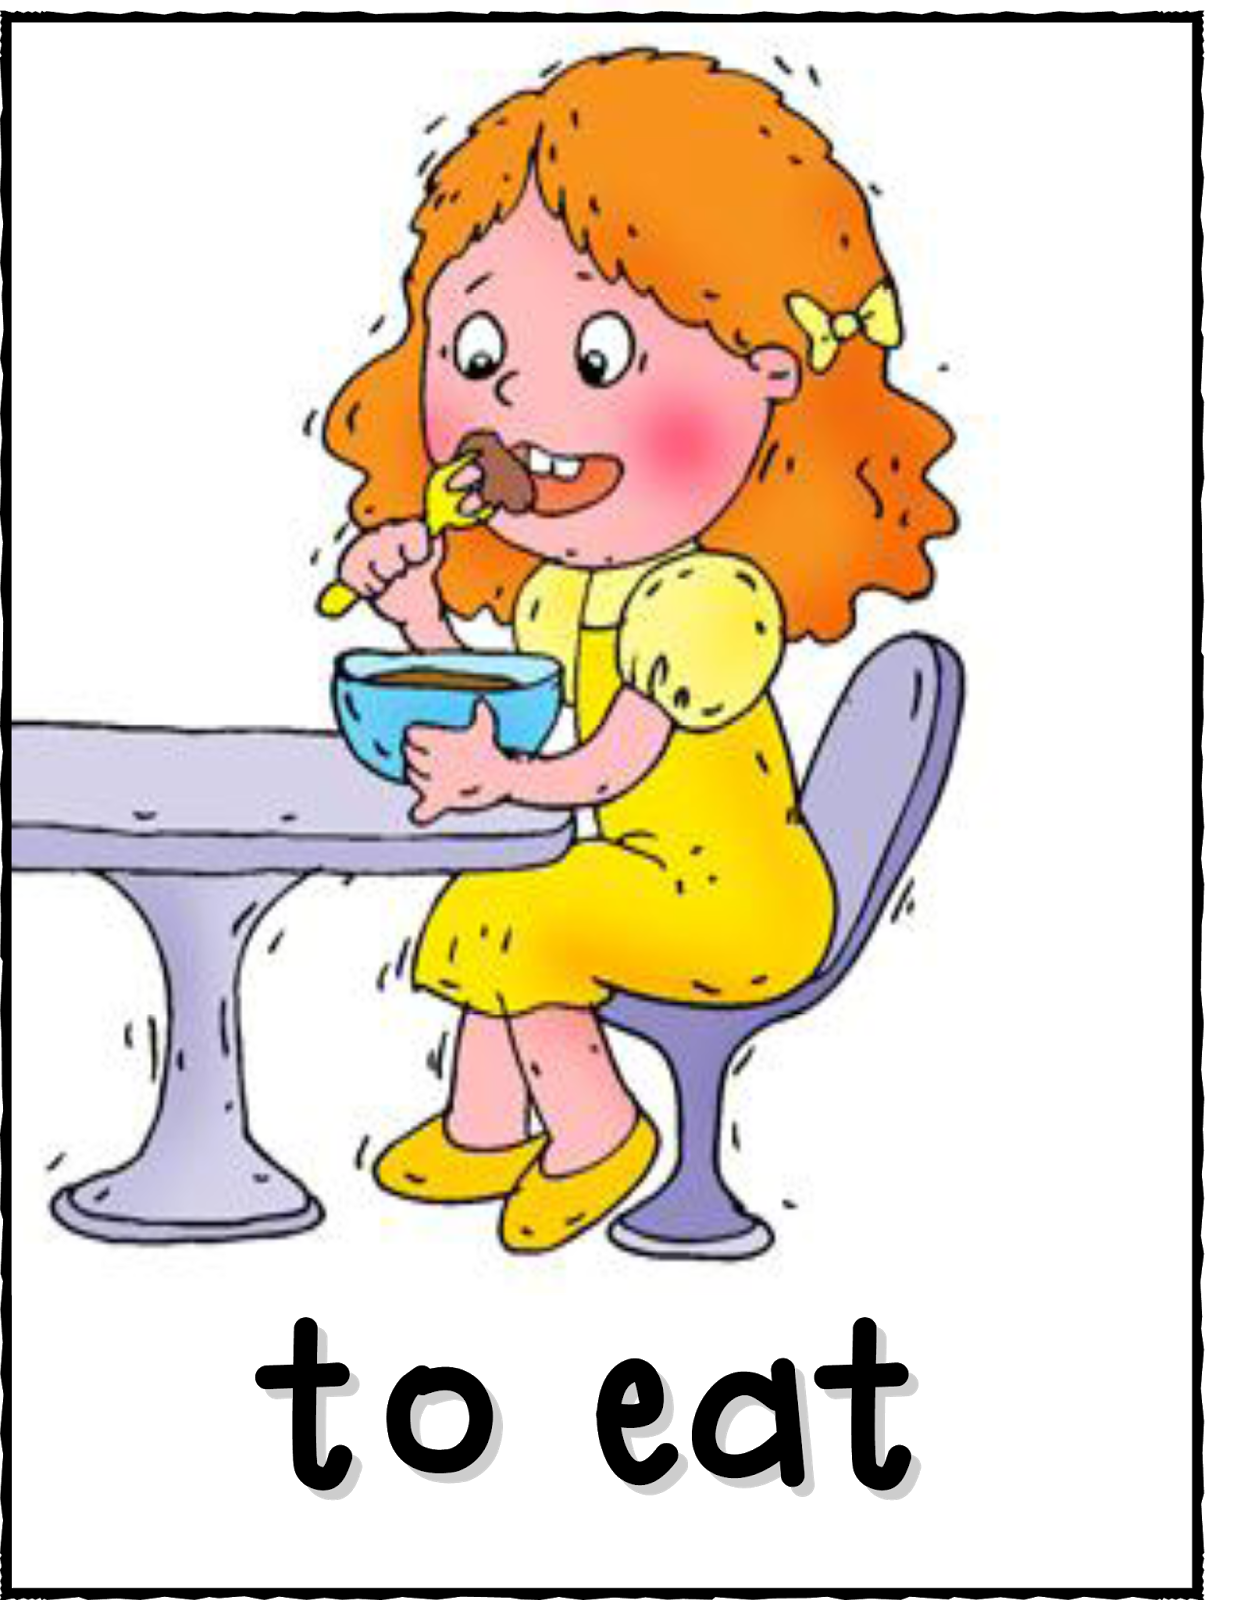 clipart images of verbs - photo #9